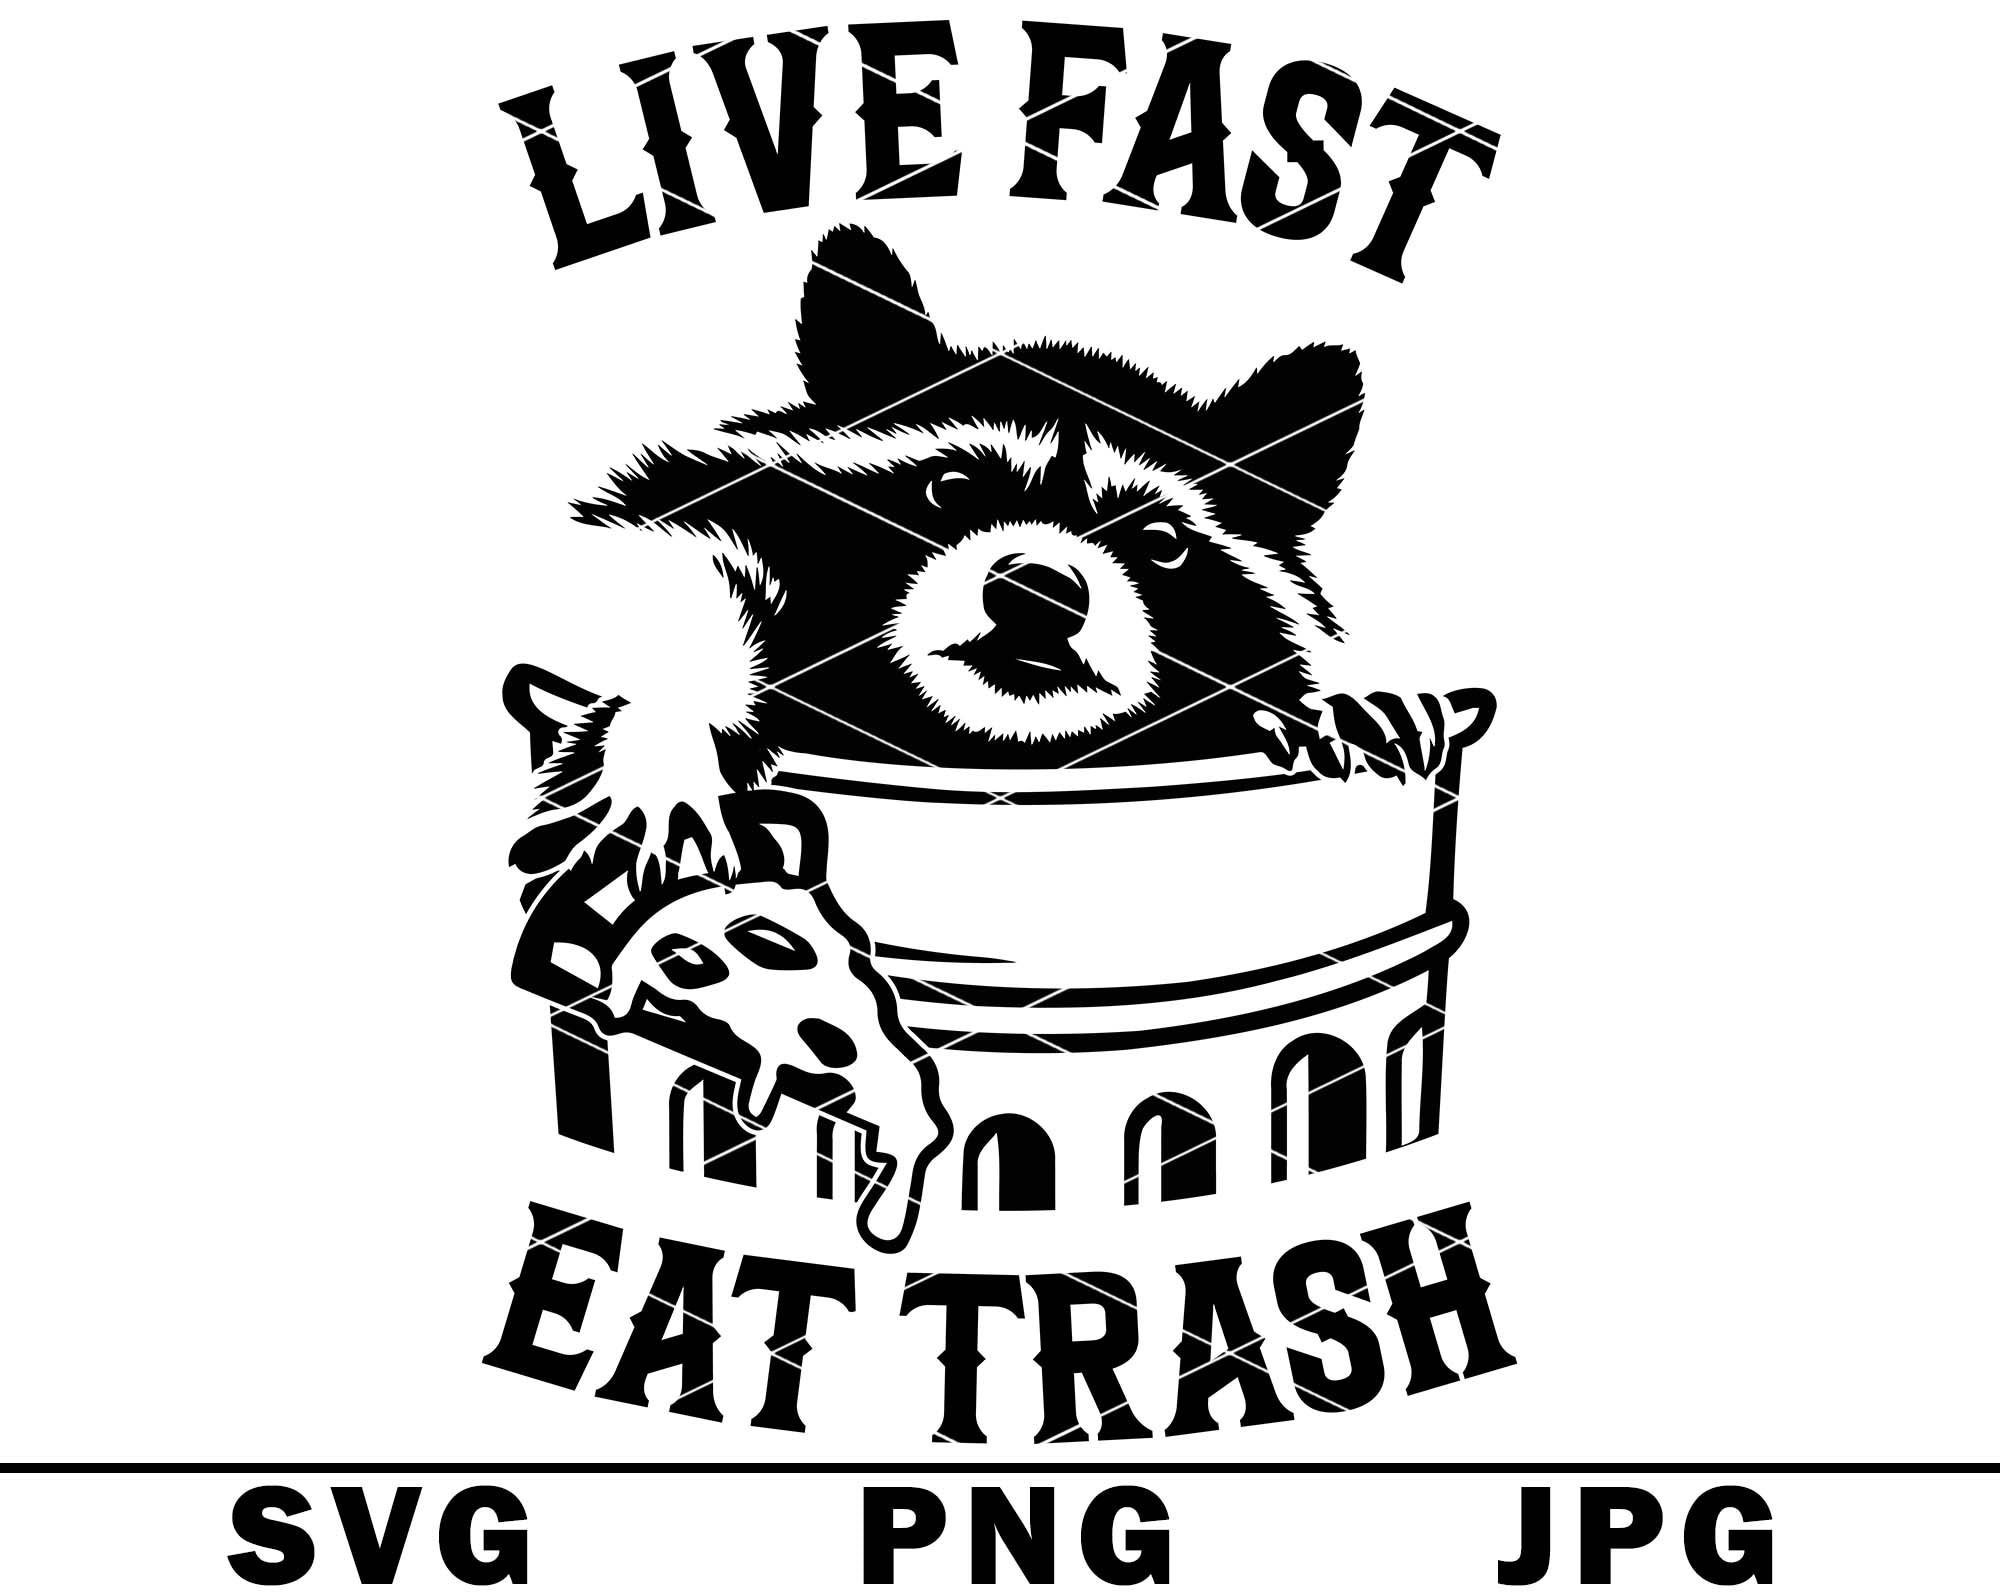 Live Fast! Eat Trash! Pin for Sale by vincenttrinidad